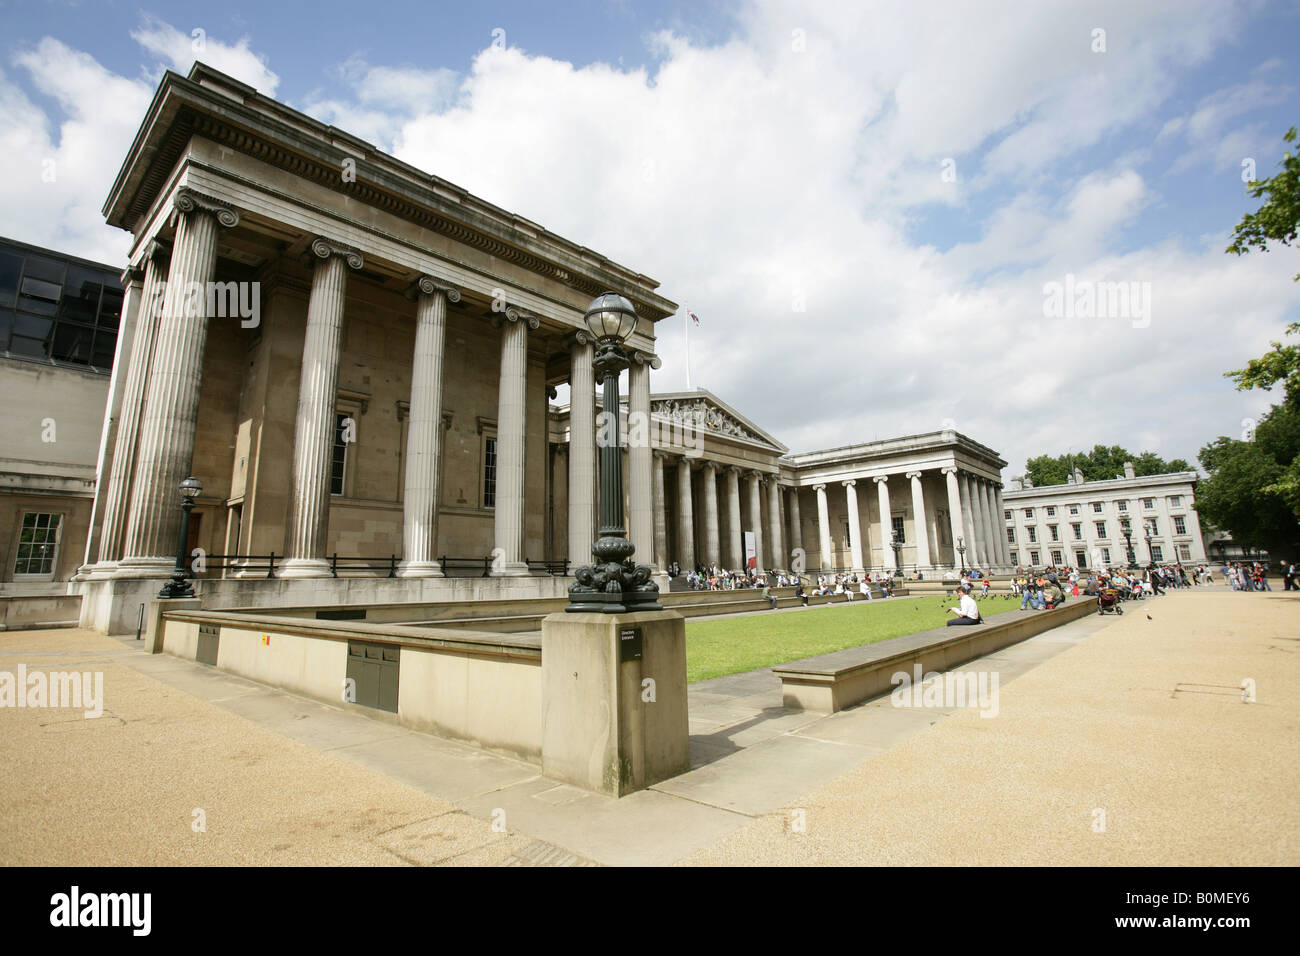 City of London, England. Die Fassade des British Museum am Great Russell Street. Stockfoto